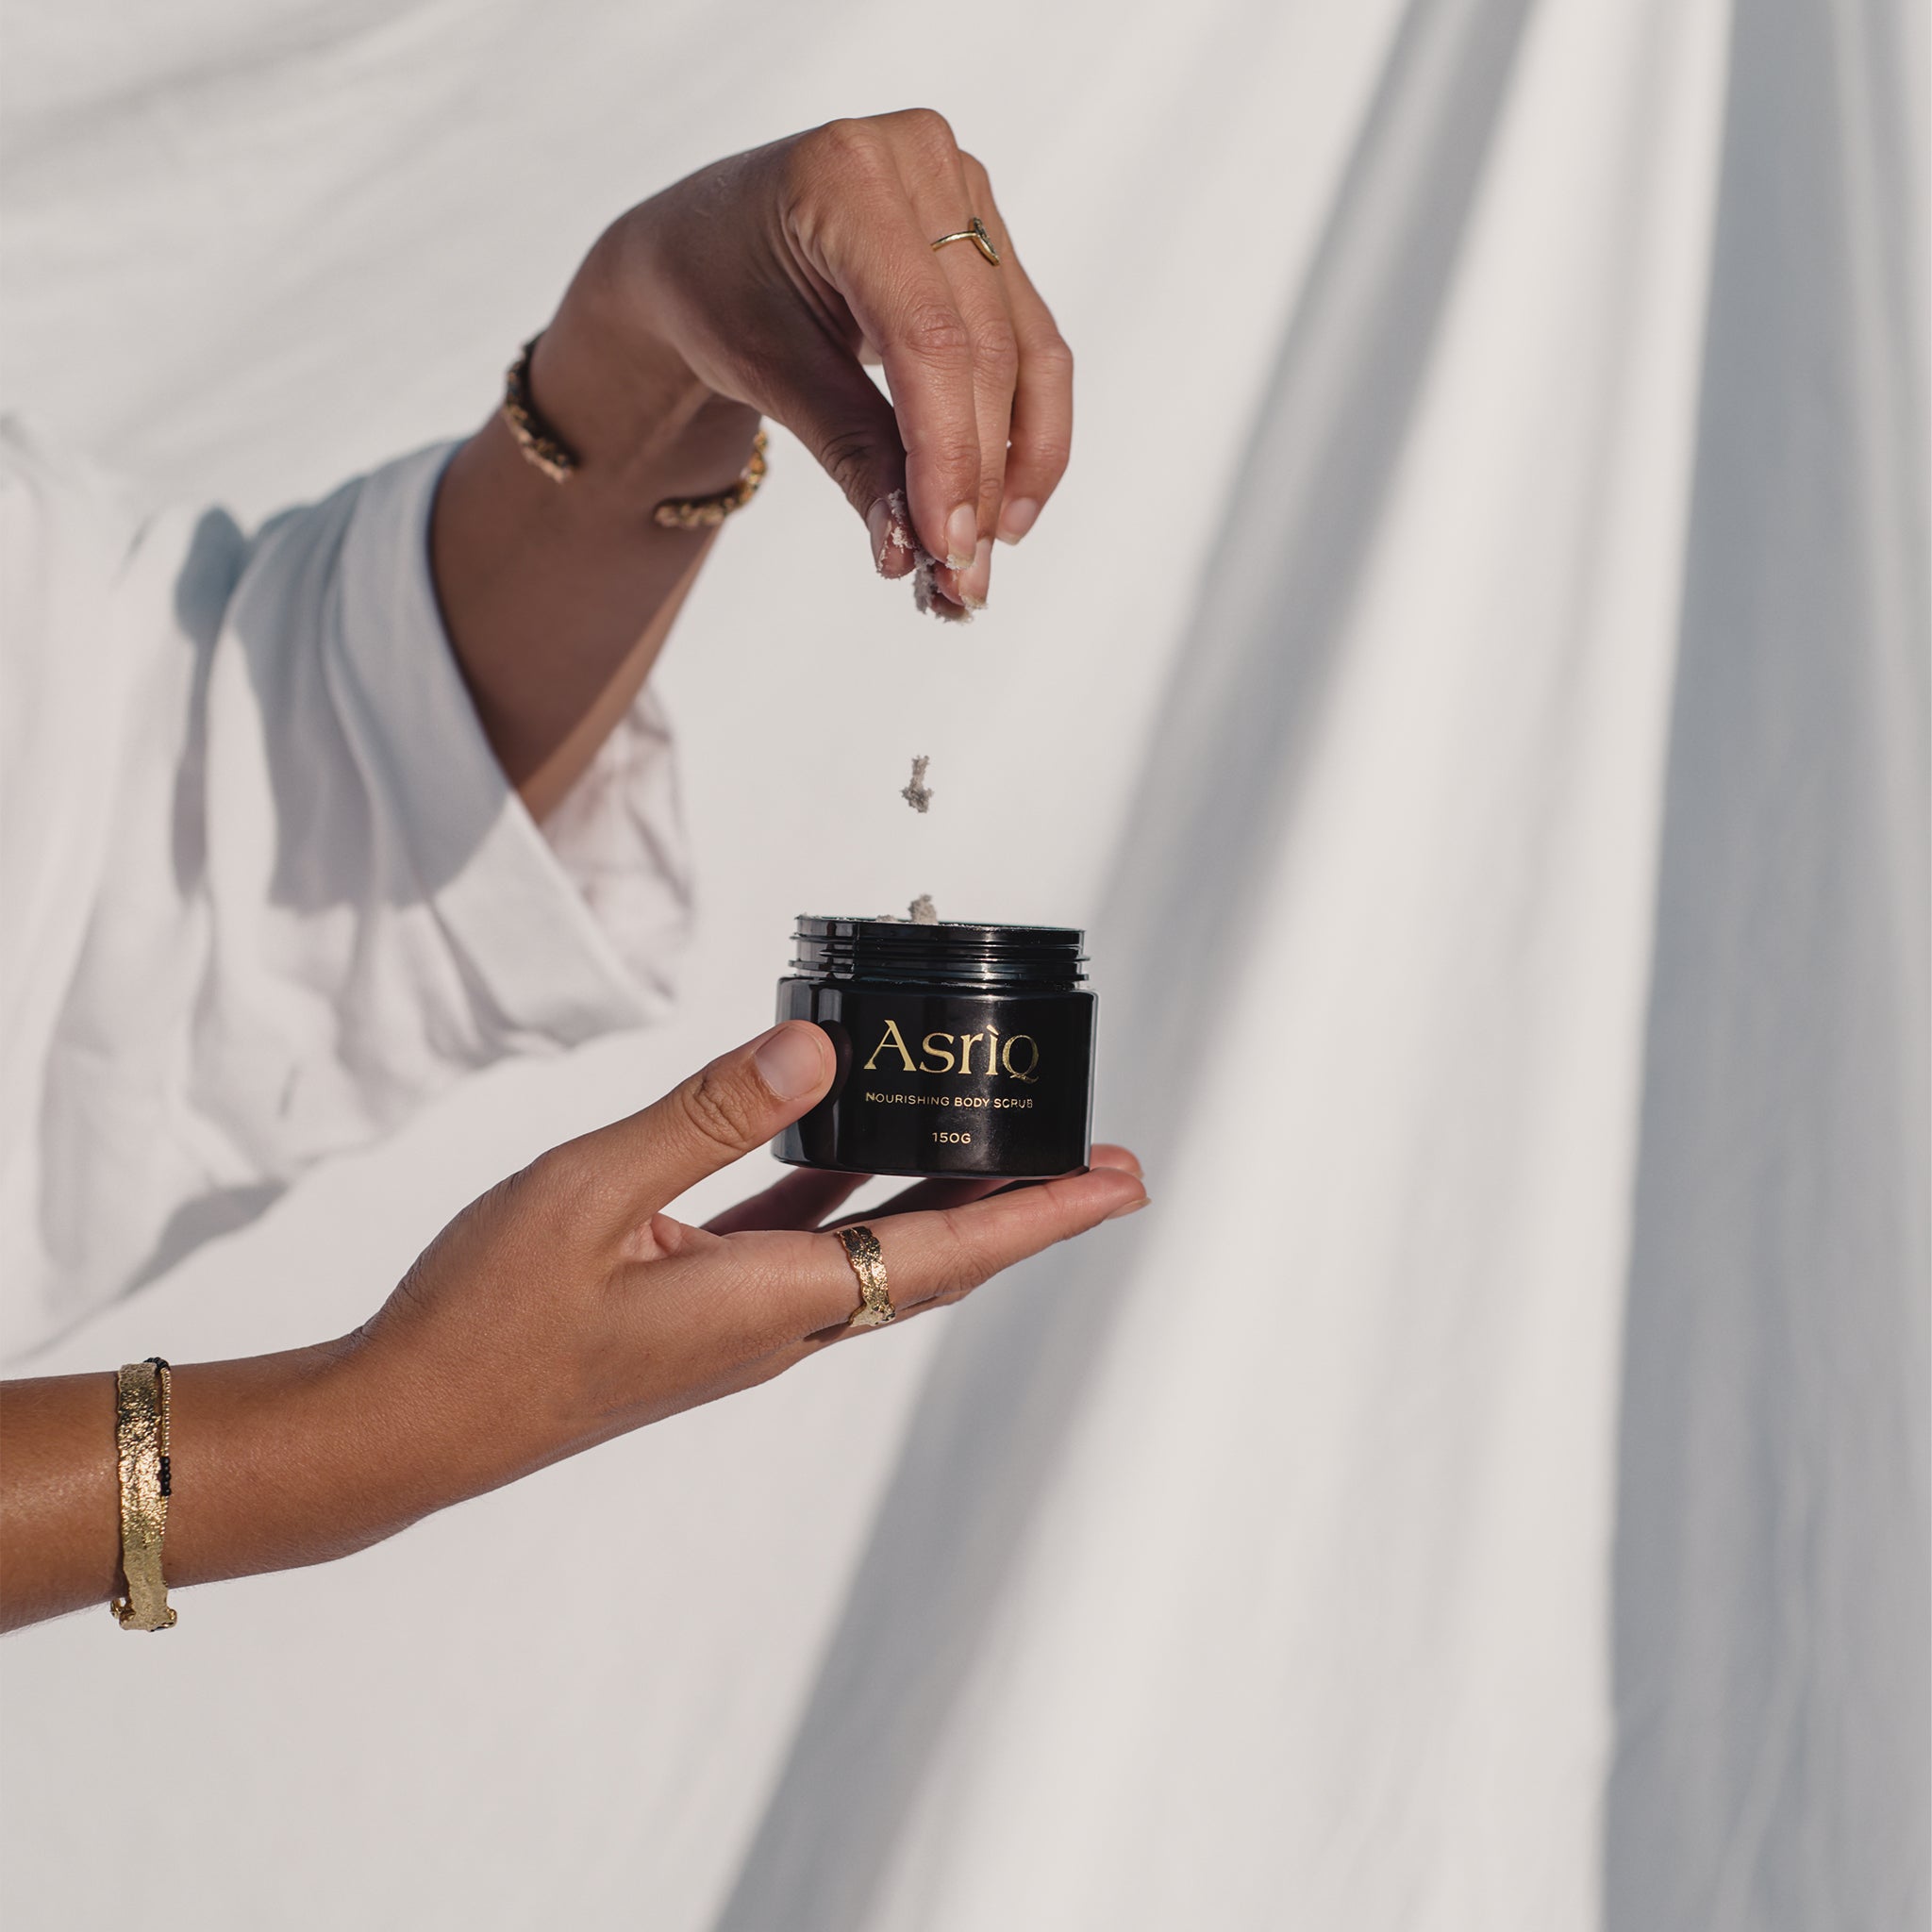 Reveal your skin's natural radiance with our luxurious 100% natural body scrub